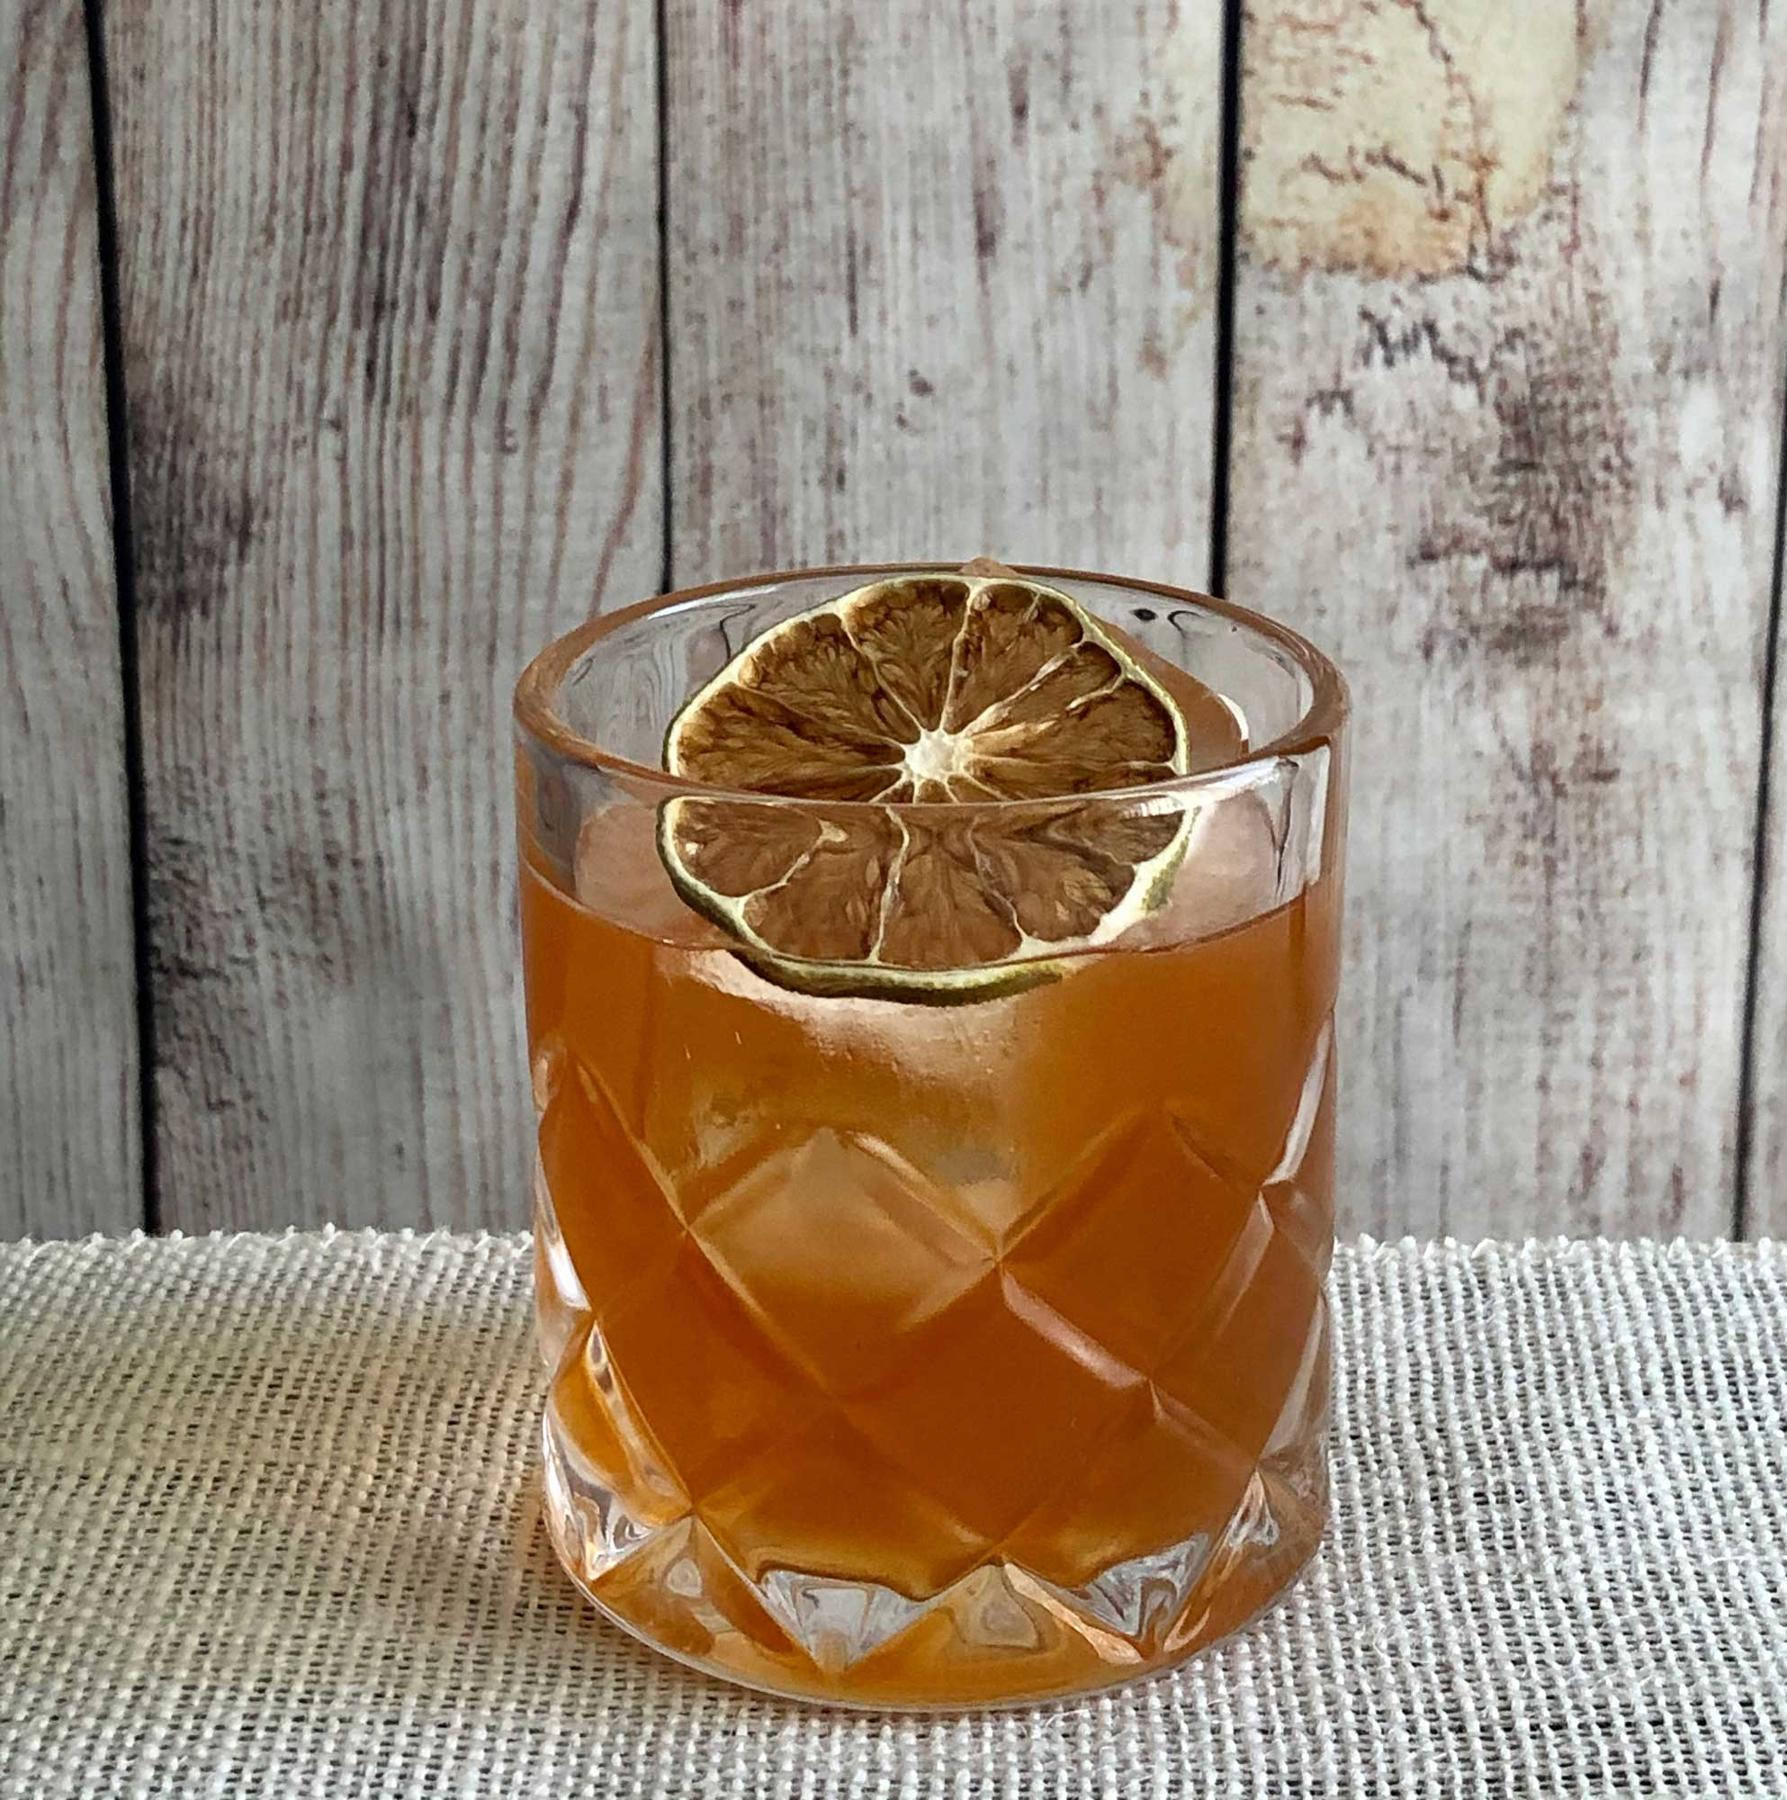 An example of the Bajan Legend, the mixed drink (drink) featuring brown barbados rum, John D. Taylor’s Velvet Falernum, Angostura bitters, and lime wheel; photo by Lee Edwards